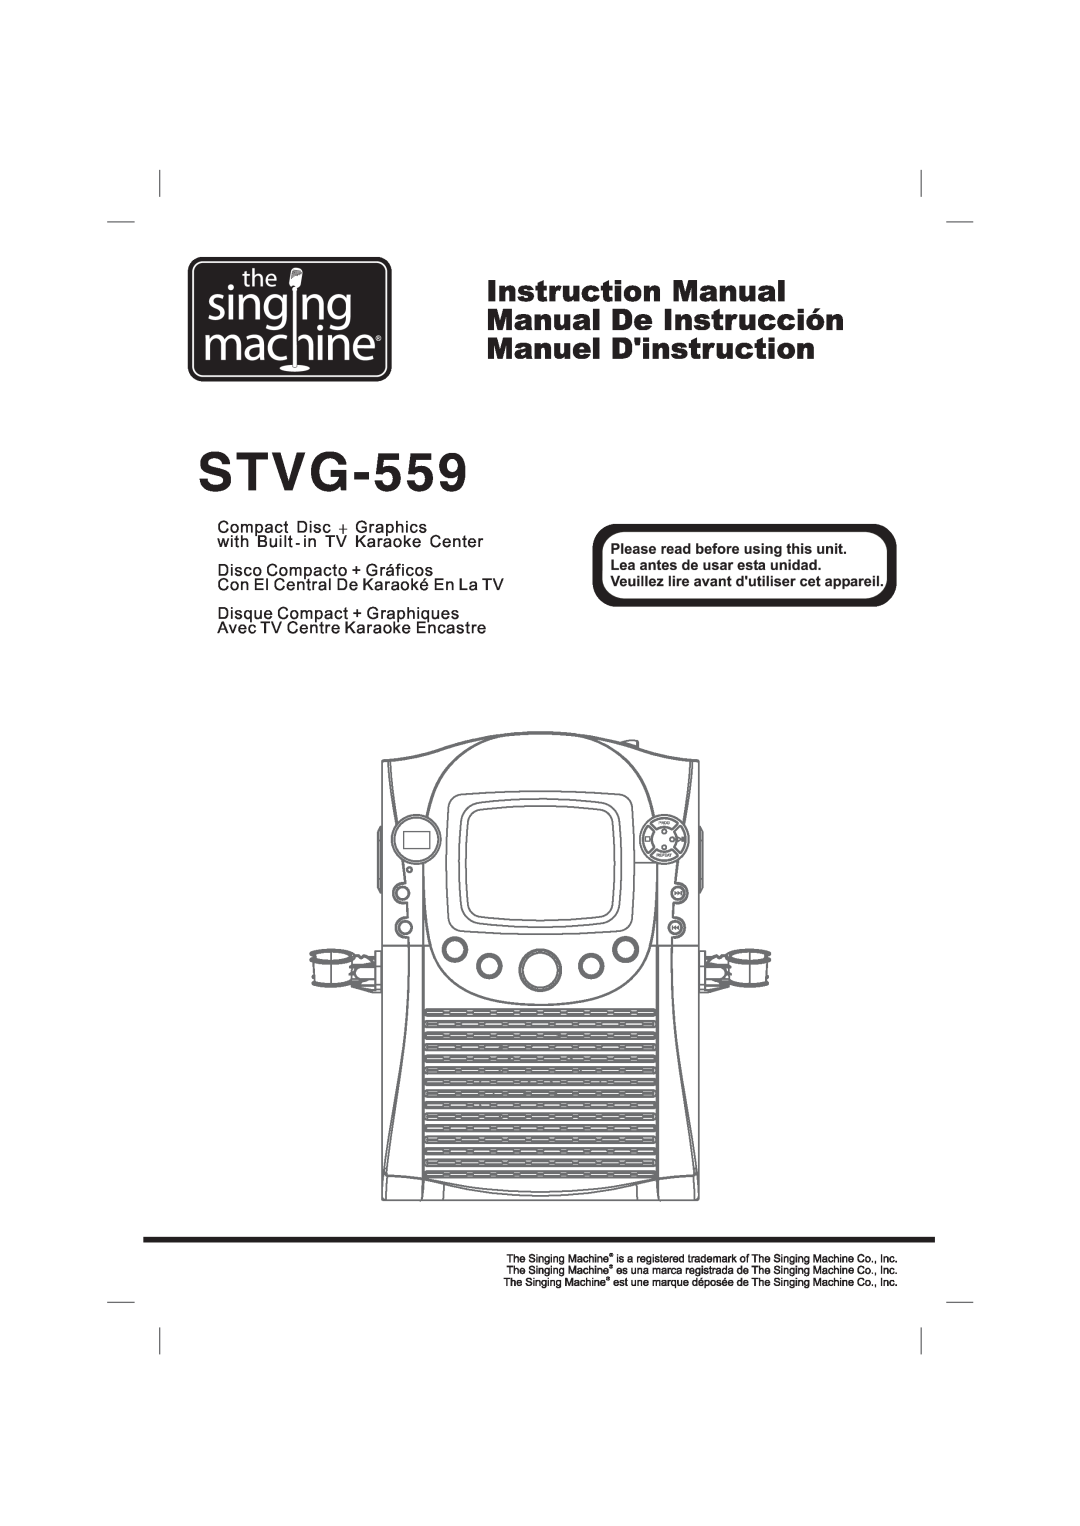 The Singing Machine STVG-559 manual Compact Disc + Graphics with Built- in TV Karaoke Center 